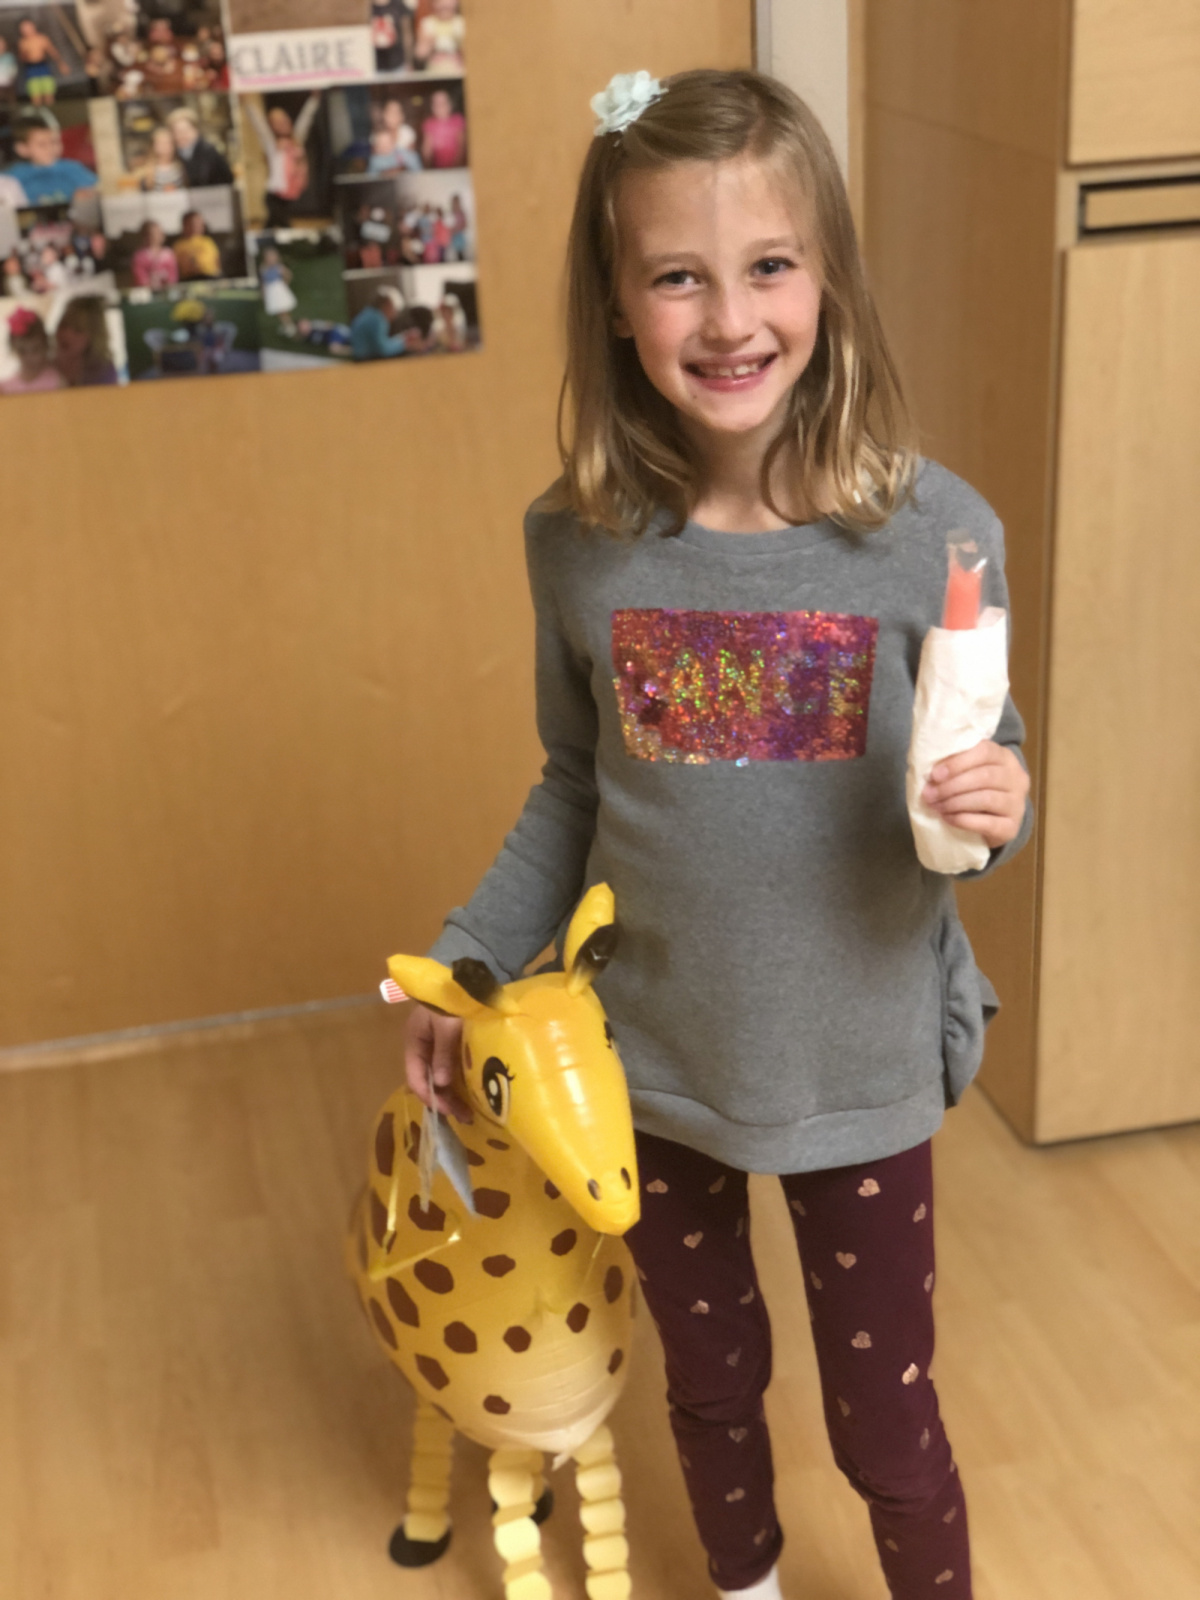 So excited to see this awesome giraffe balloon from her school EPES!